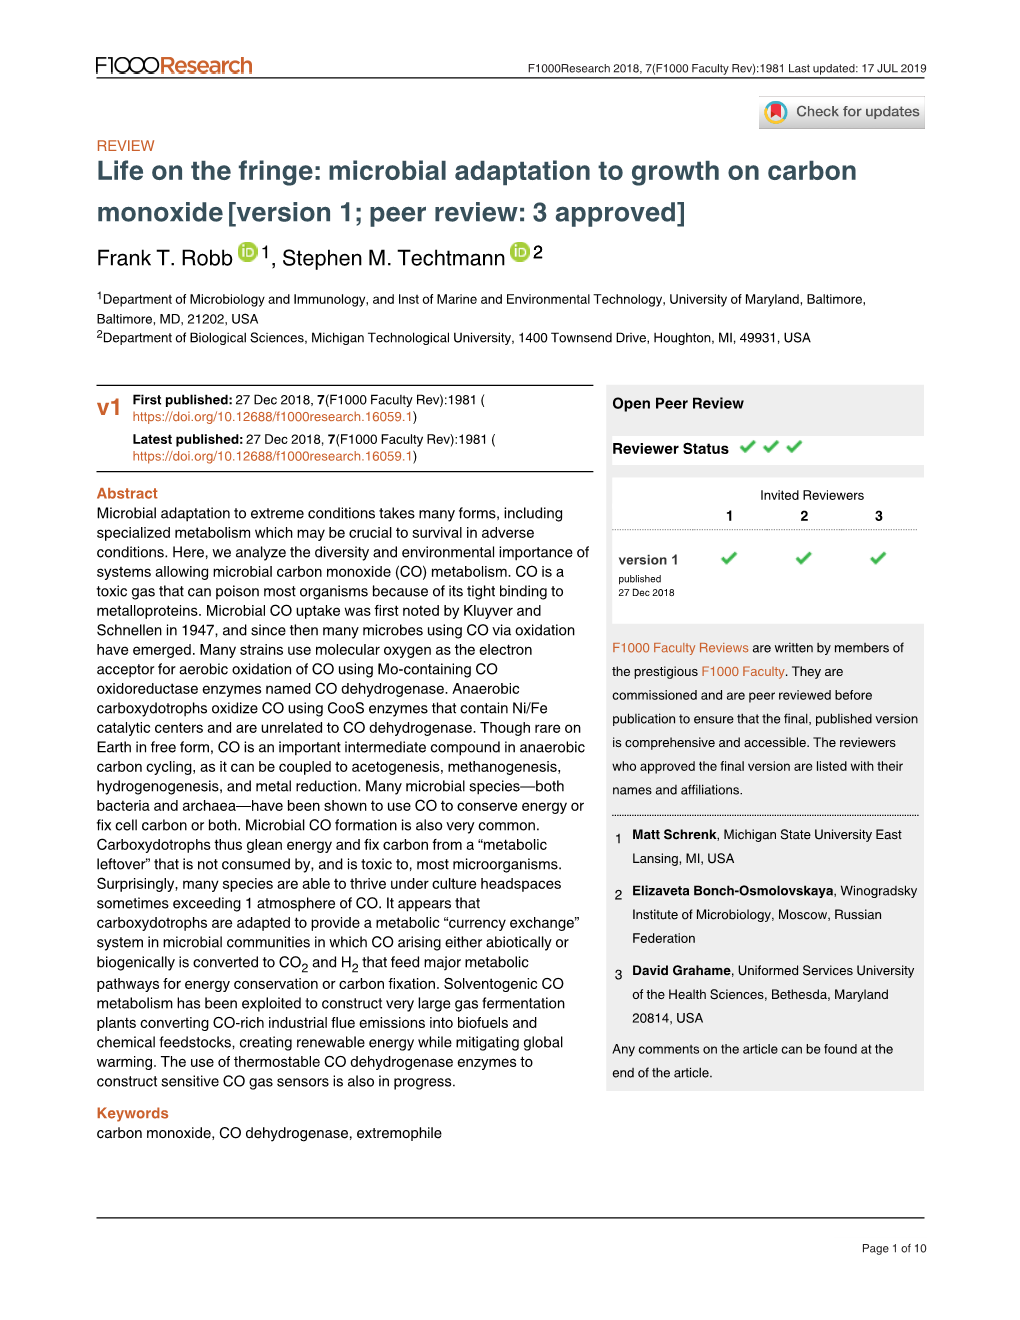 Microbial Adaptation to Growth on Carbon Monoxide [Version 1; Peer Review: 3 Approved] Frank T